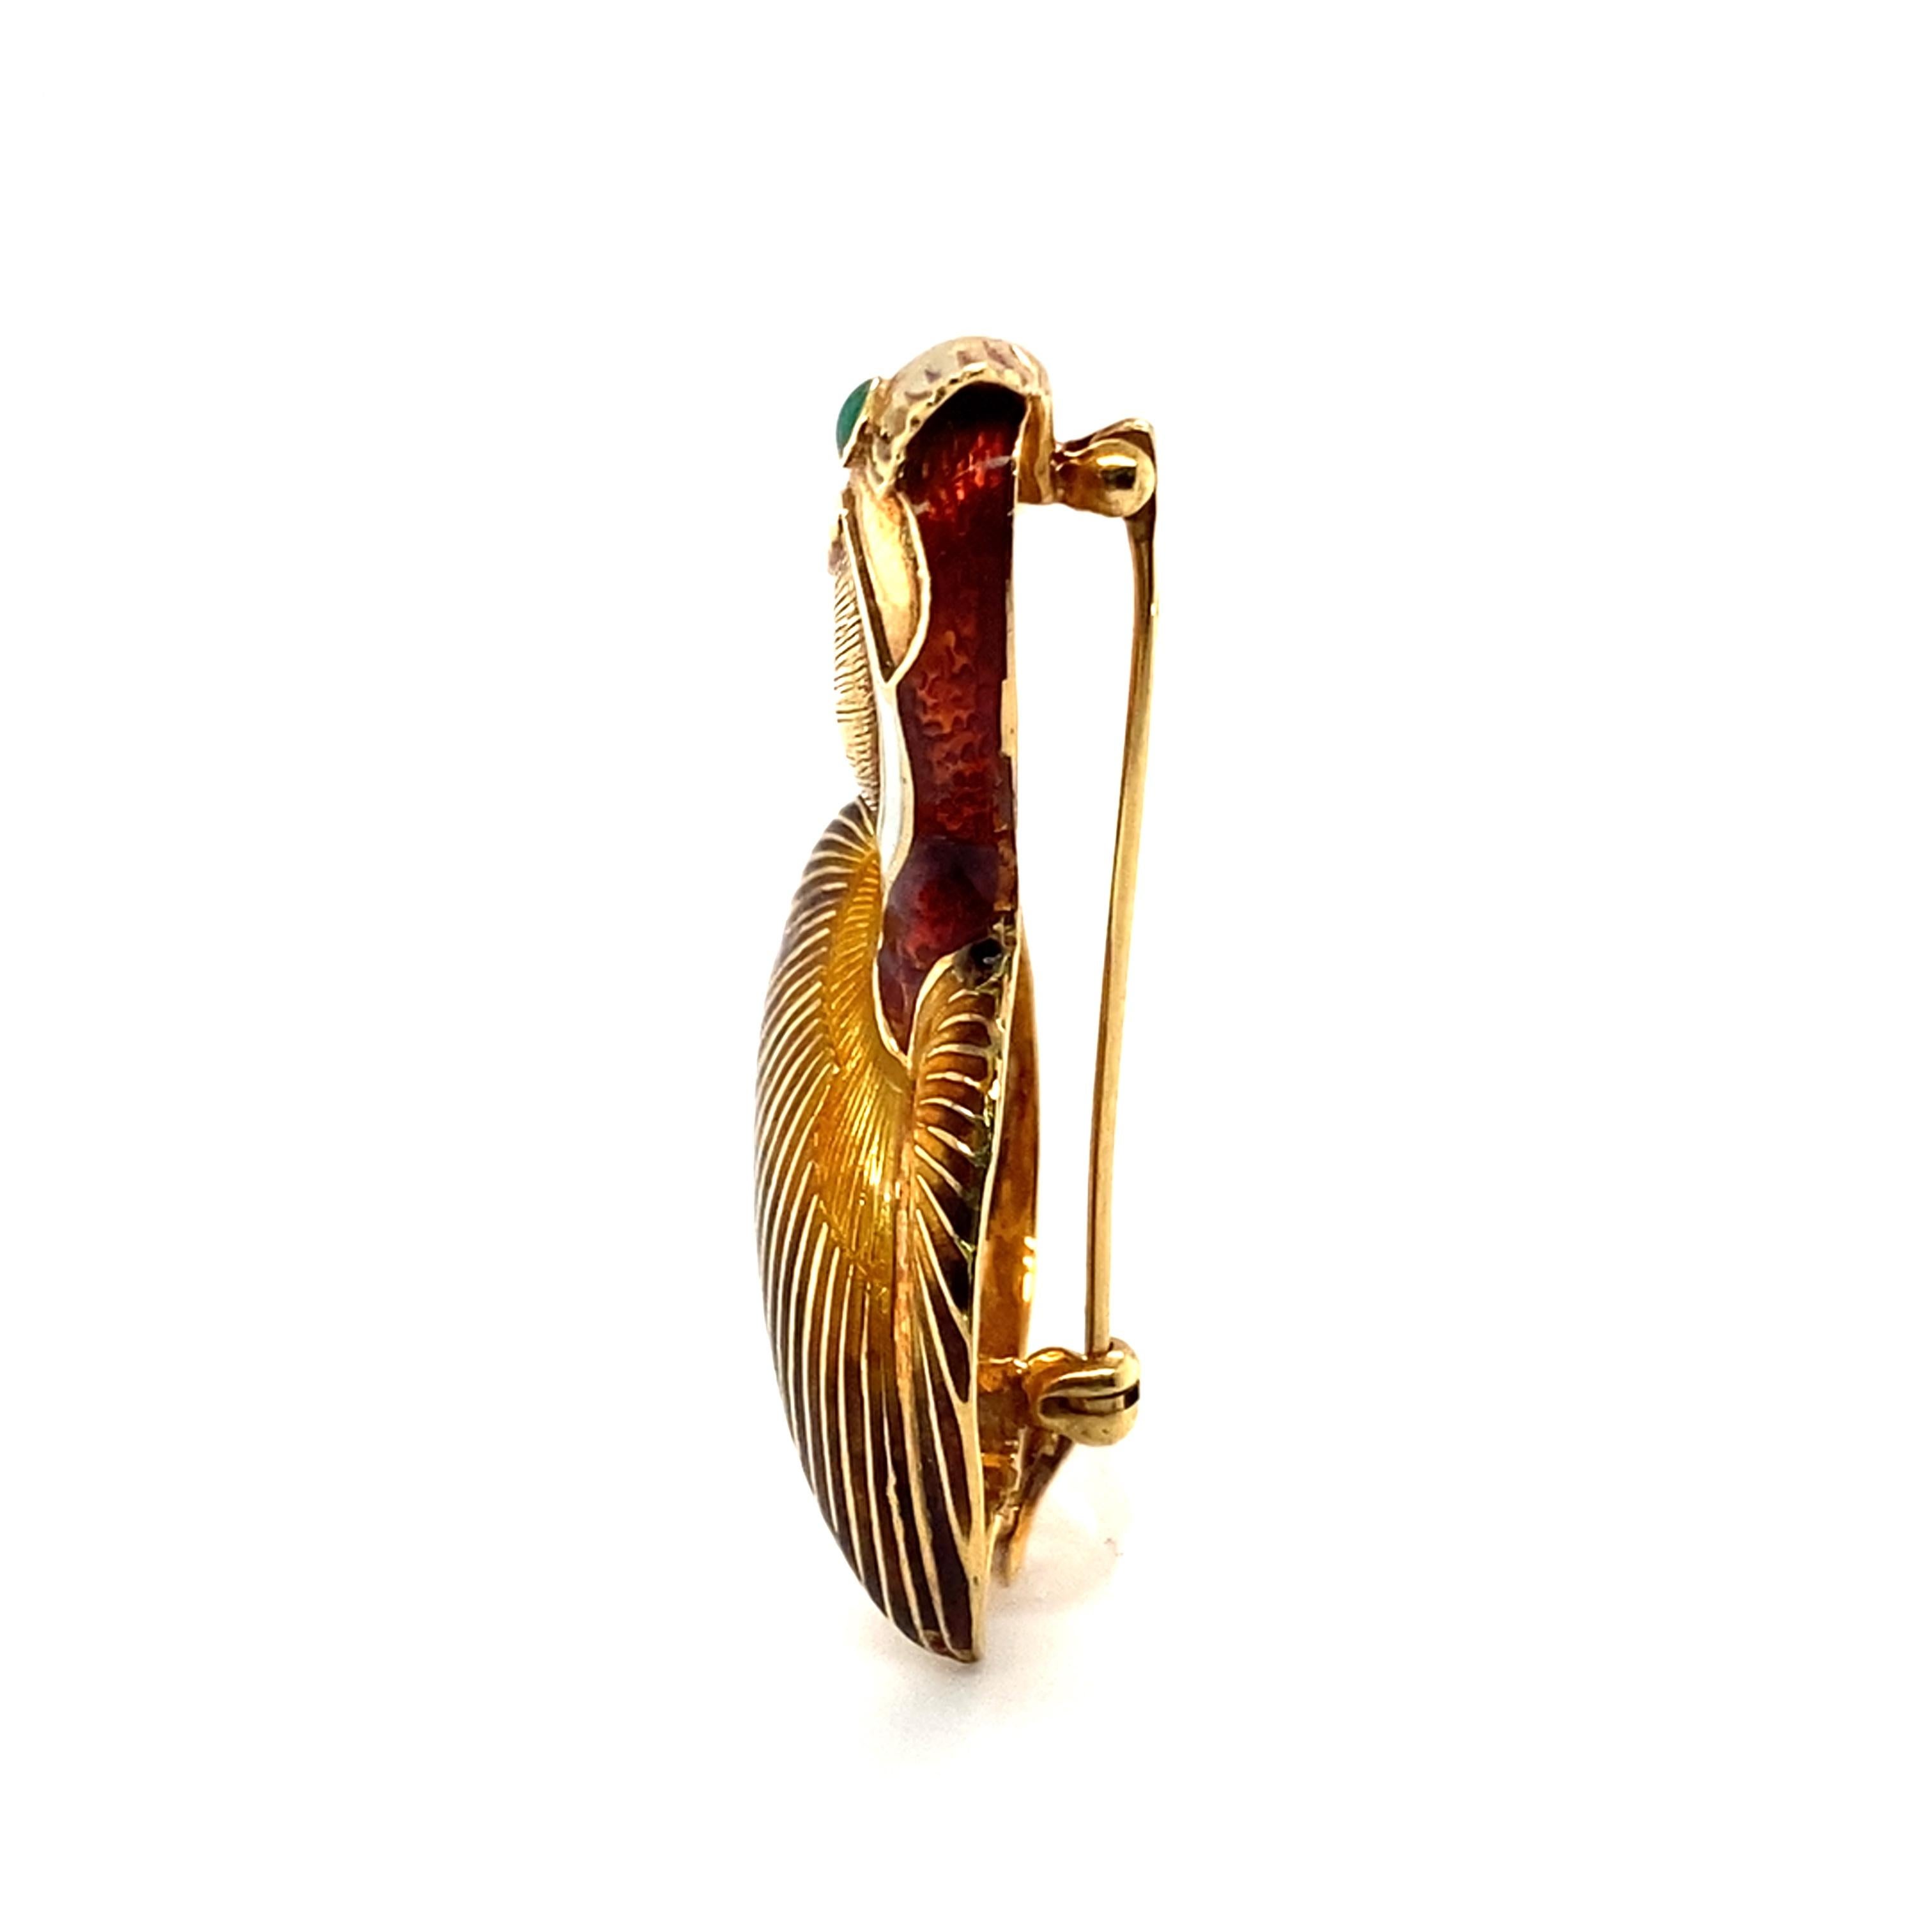 Retro 1970s Pelican Pin with Enamel and Cabochon Eye in 18 Karat Yellow Gold  For Sale